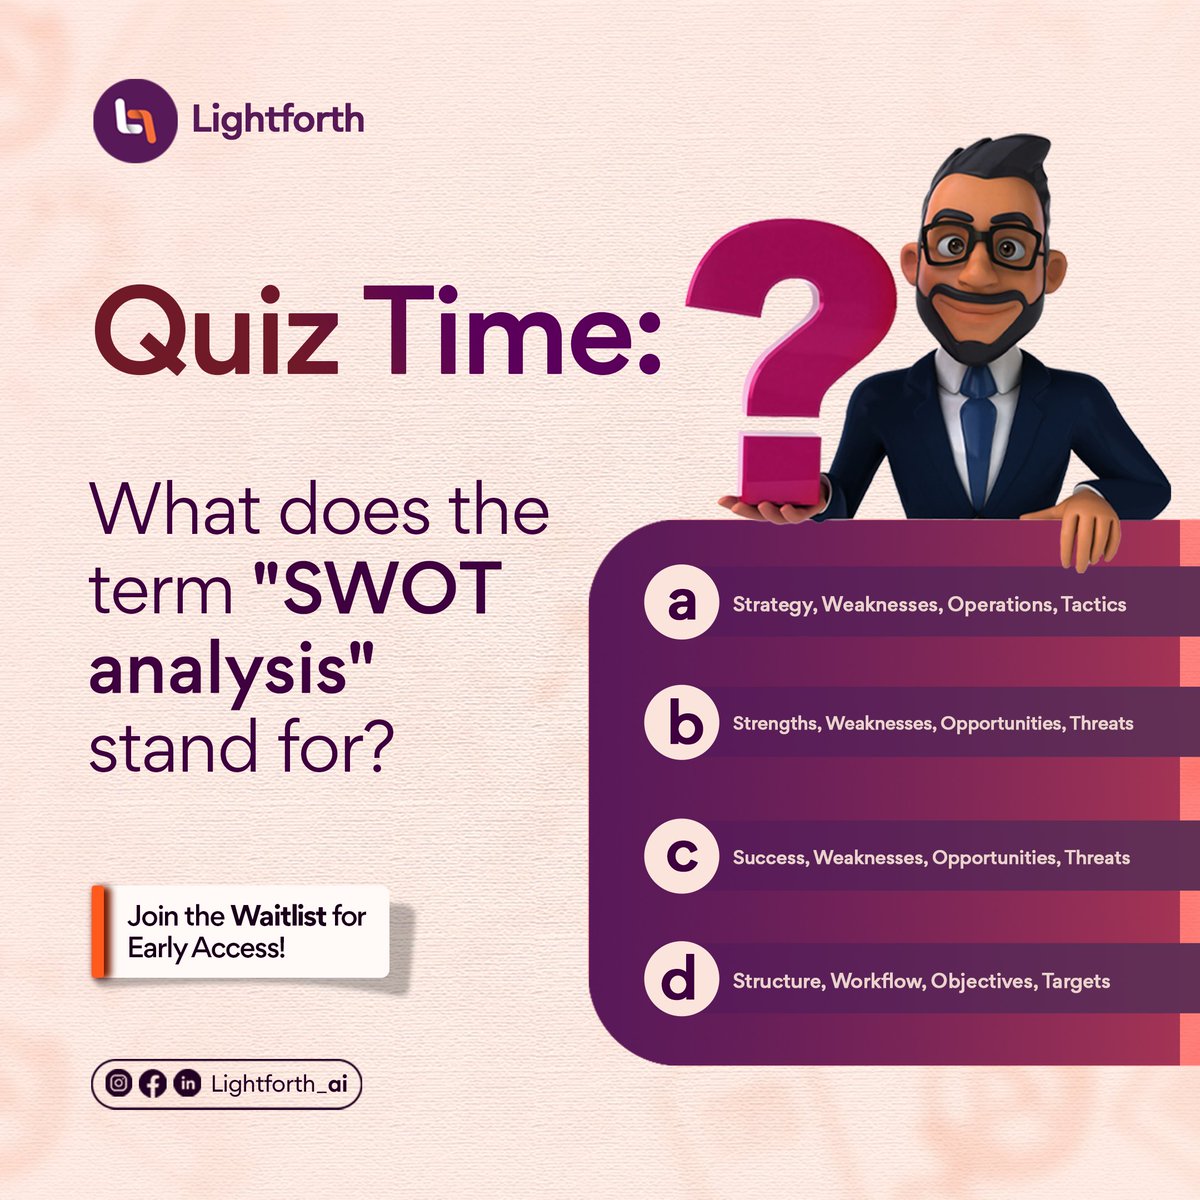 It's Quiz Friday! 🎉

Test your knowledge and challenge yourself with our fun quiz. 

How much do you really know? Find out and maybe learn something new along the way!👇

#FunFriday #QuizTime #TestYourKnowledge